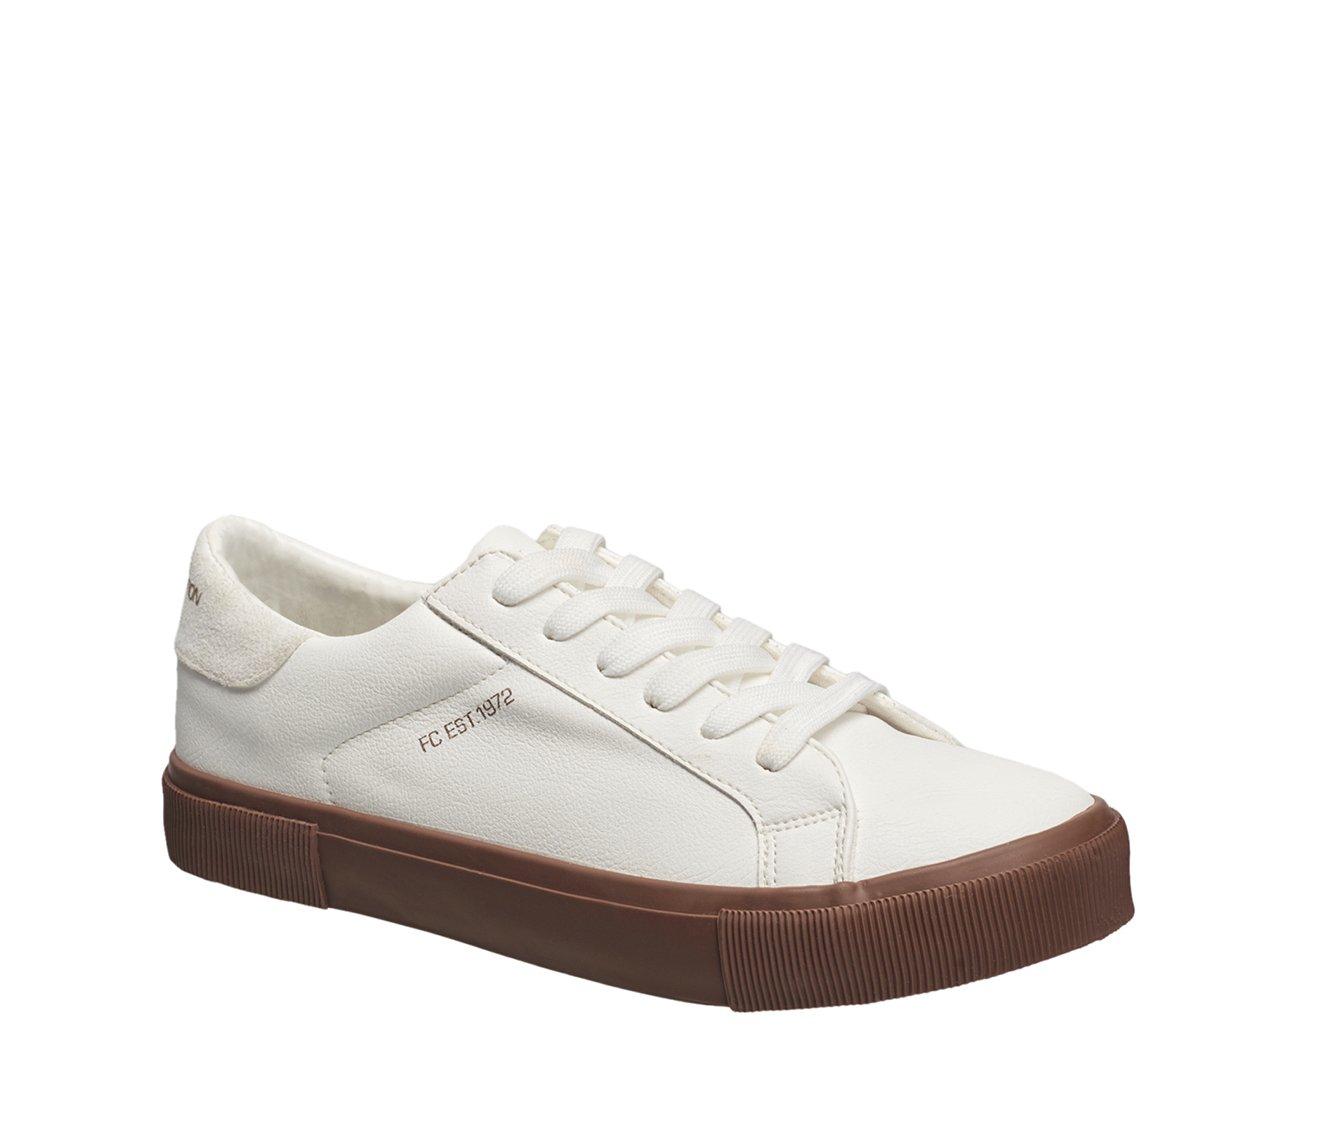 Women's French Connection Becka Sneakers